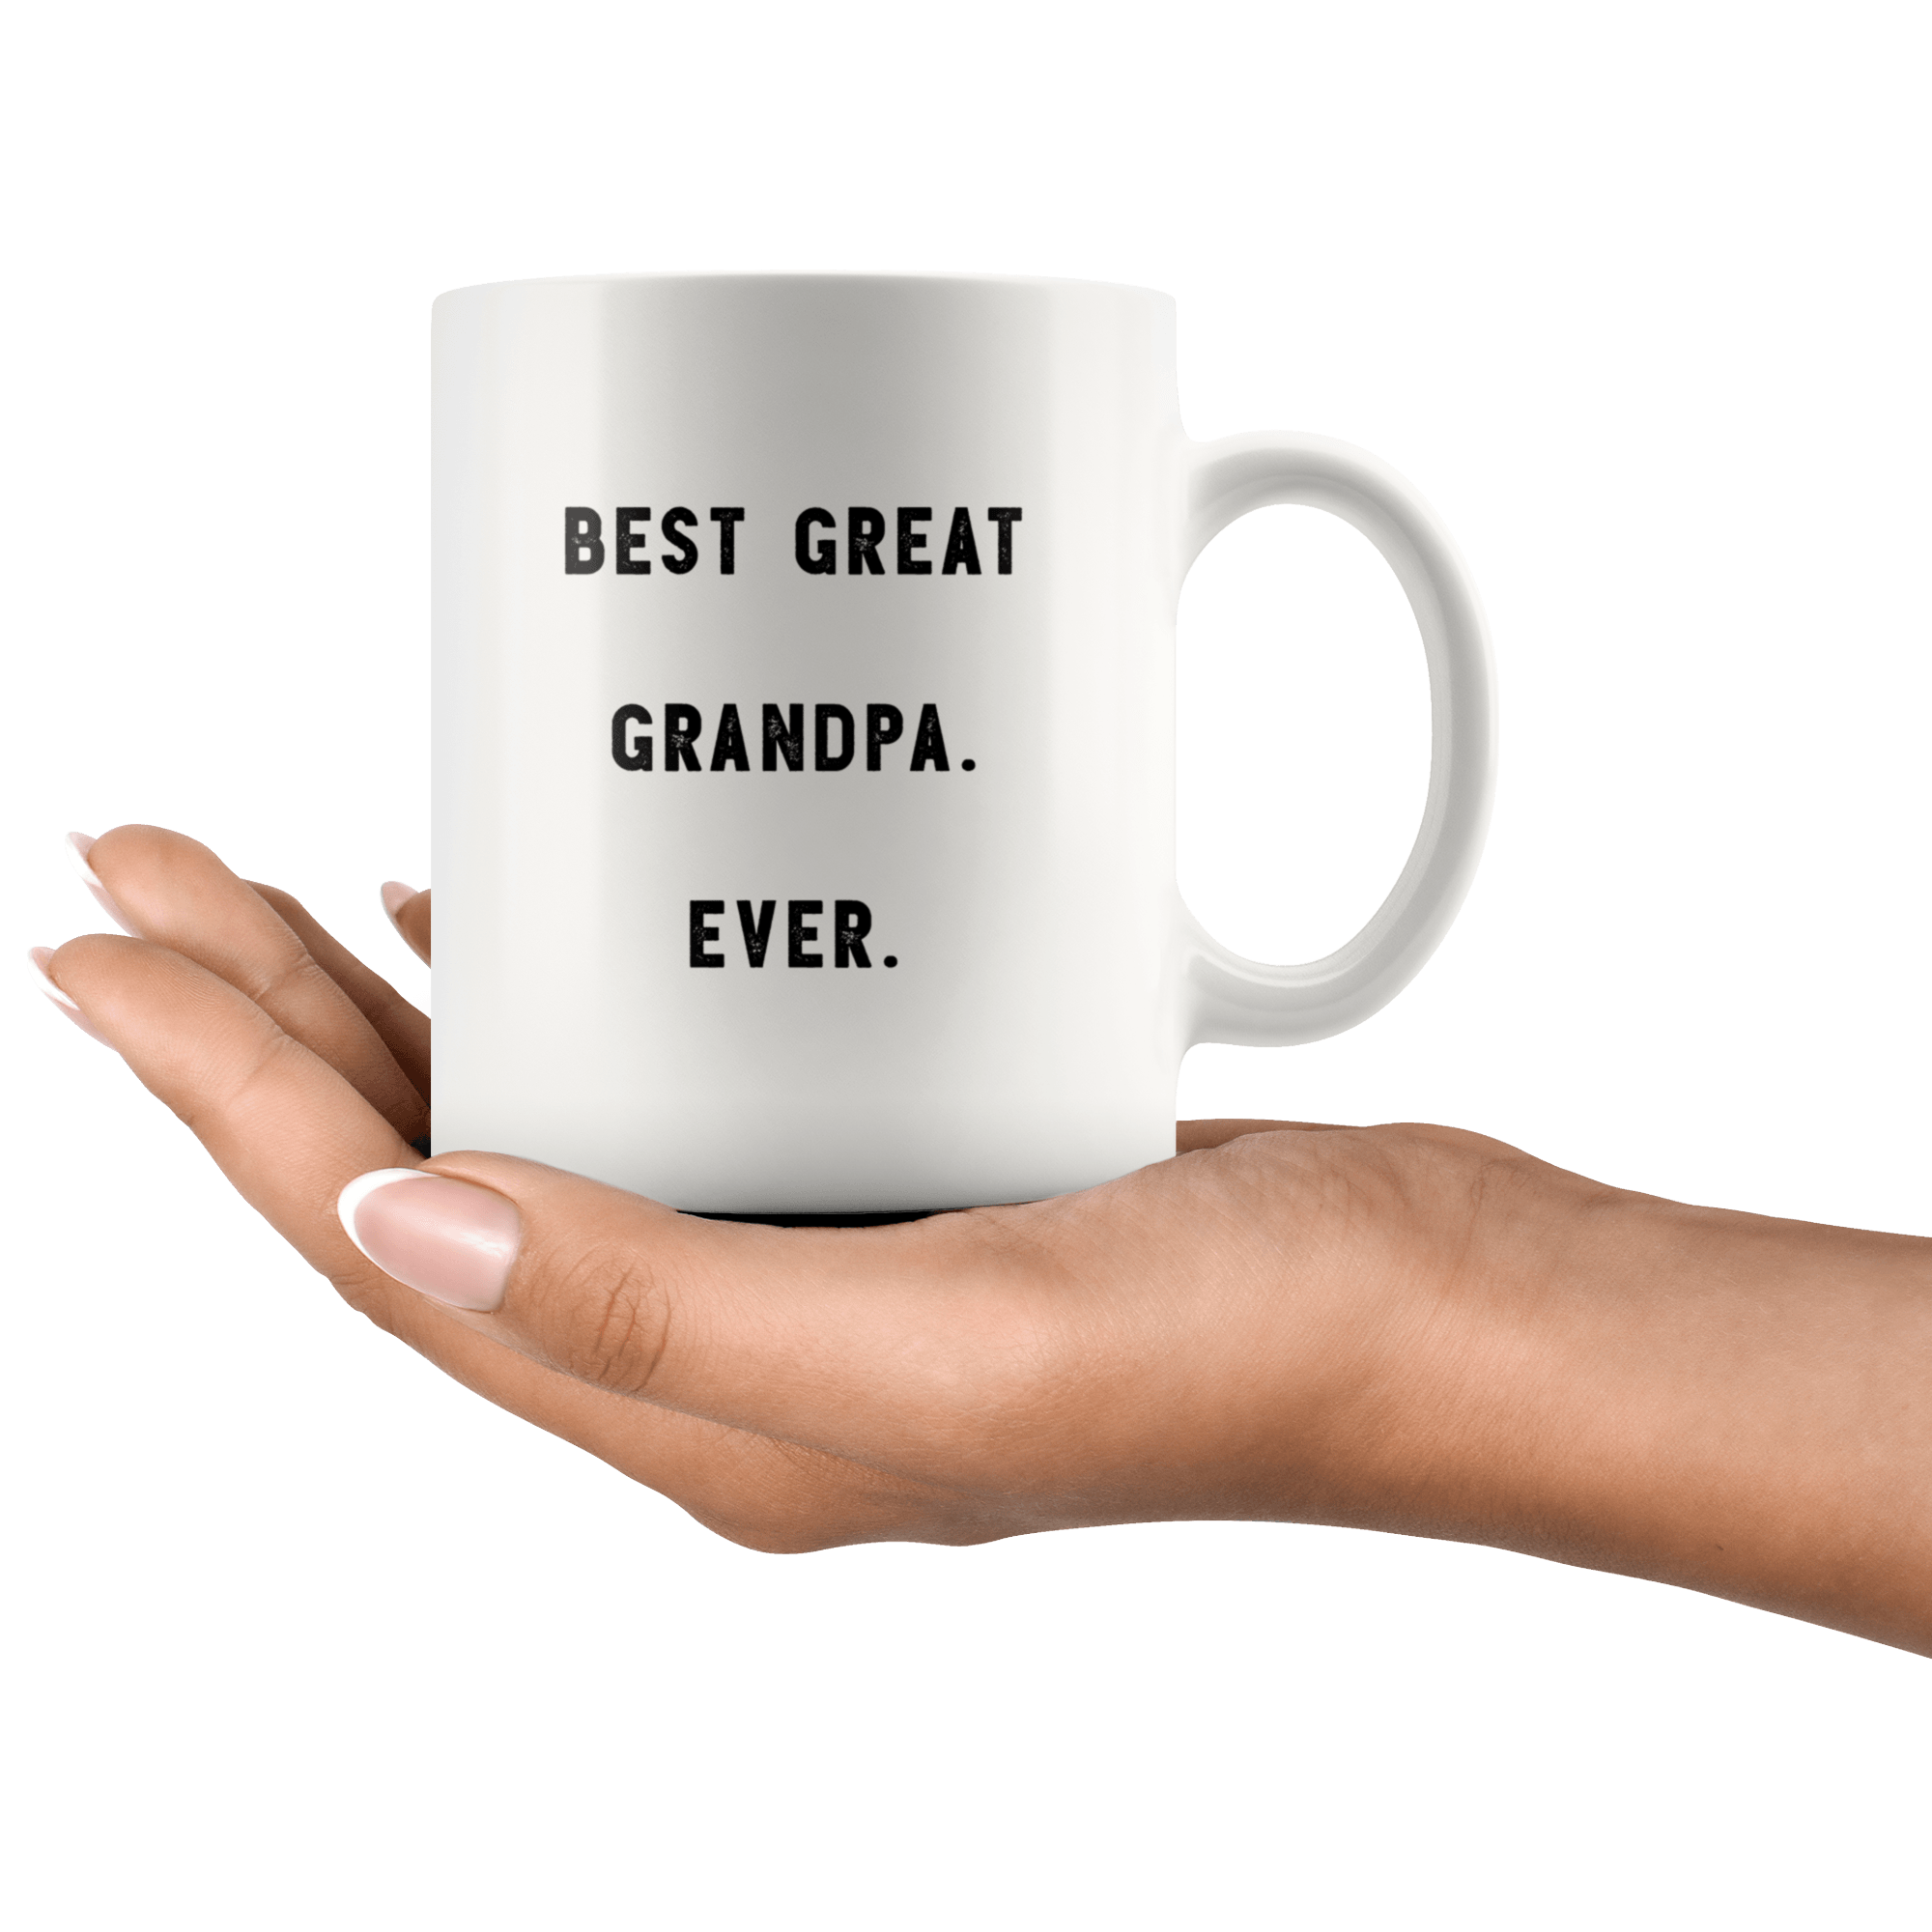 Best Great Grandpa. Ever. The Funny Coworker Office Gag Gifts